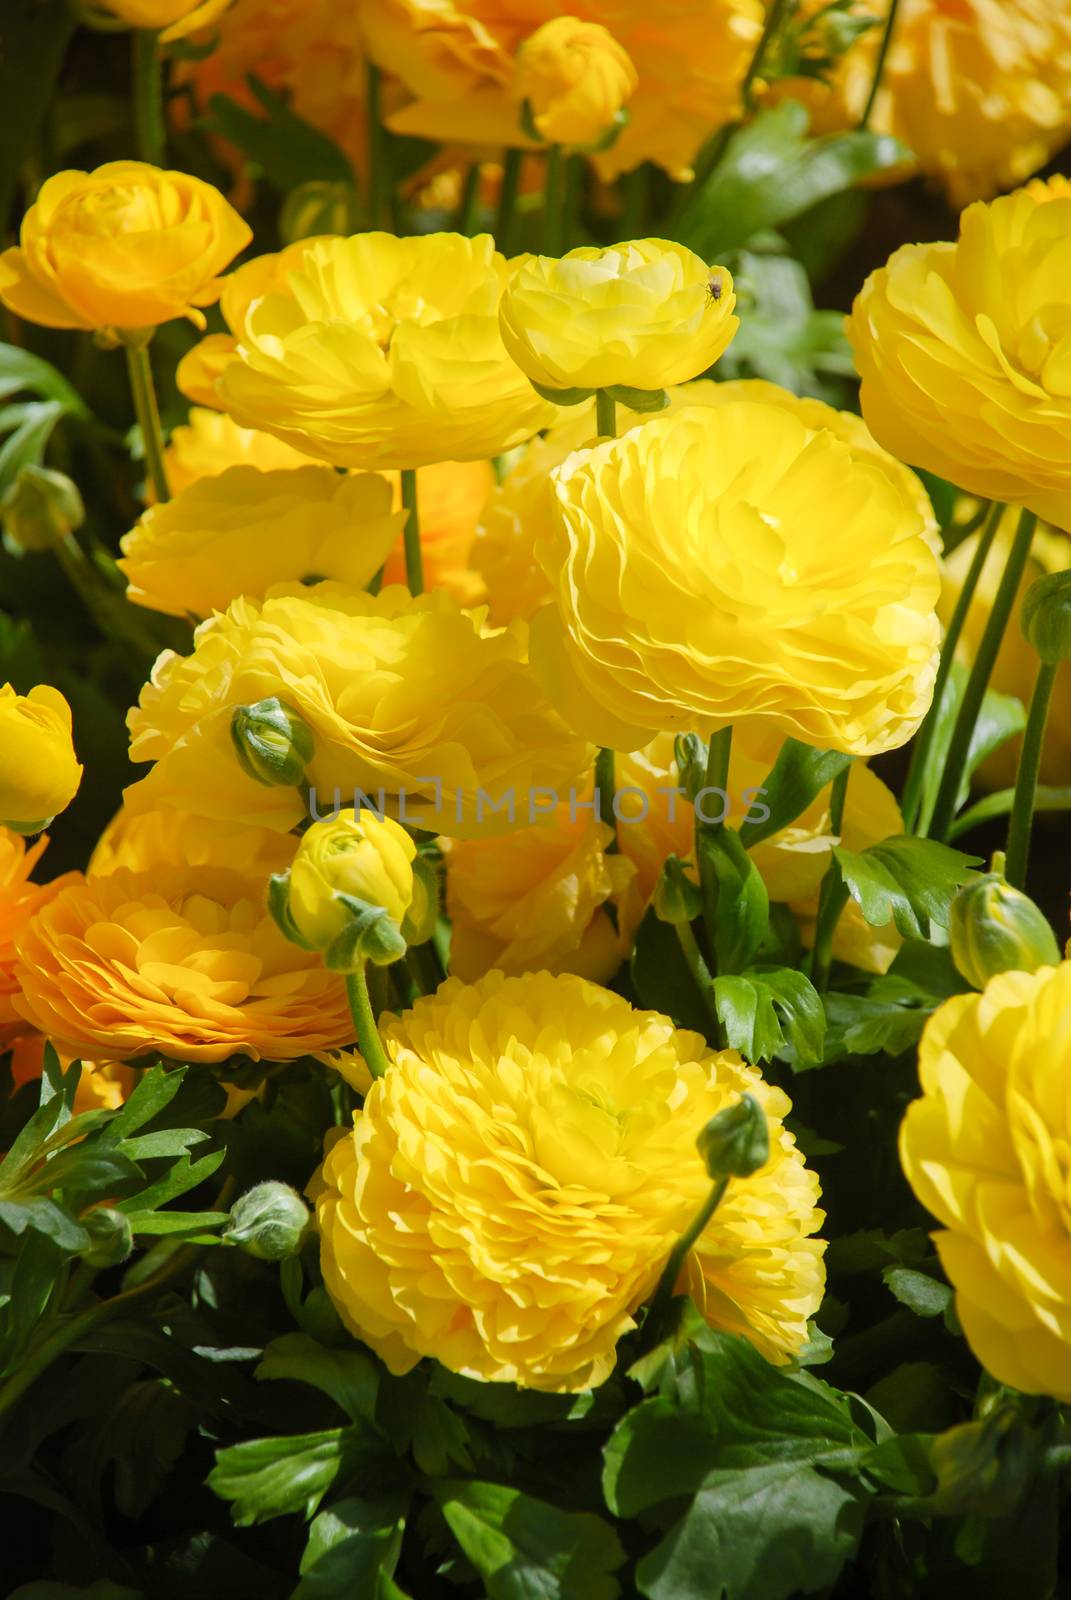 Ranunculus flora. A blossomed flower with detailed petals shot by yuiyuize